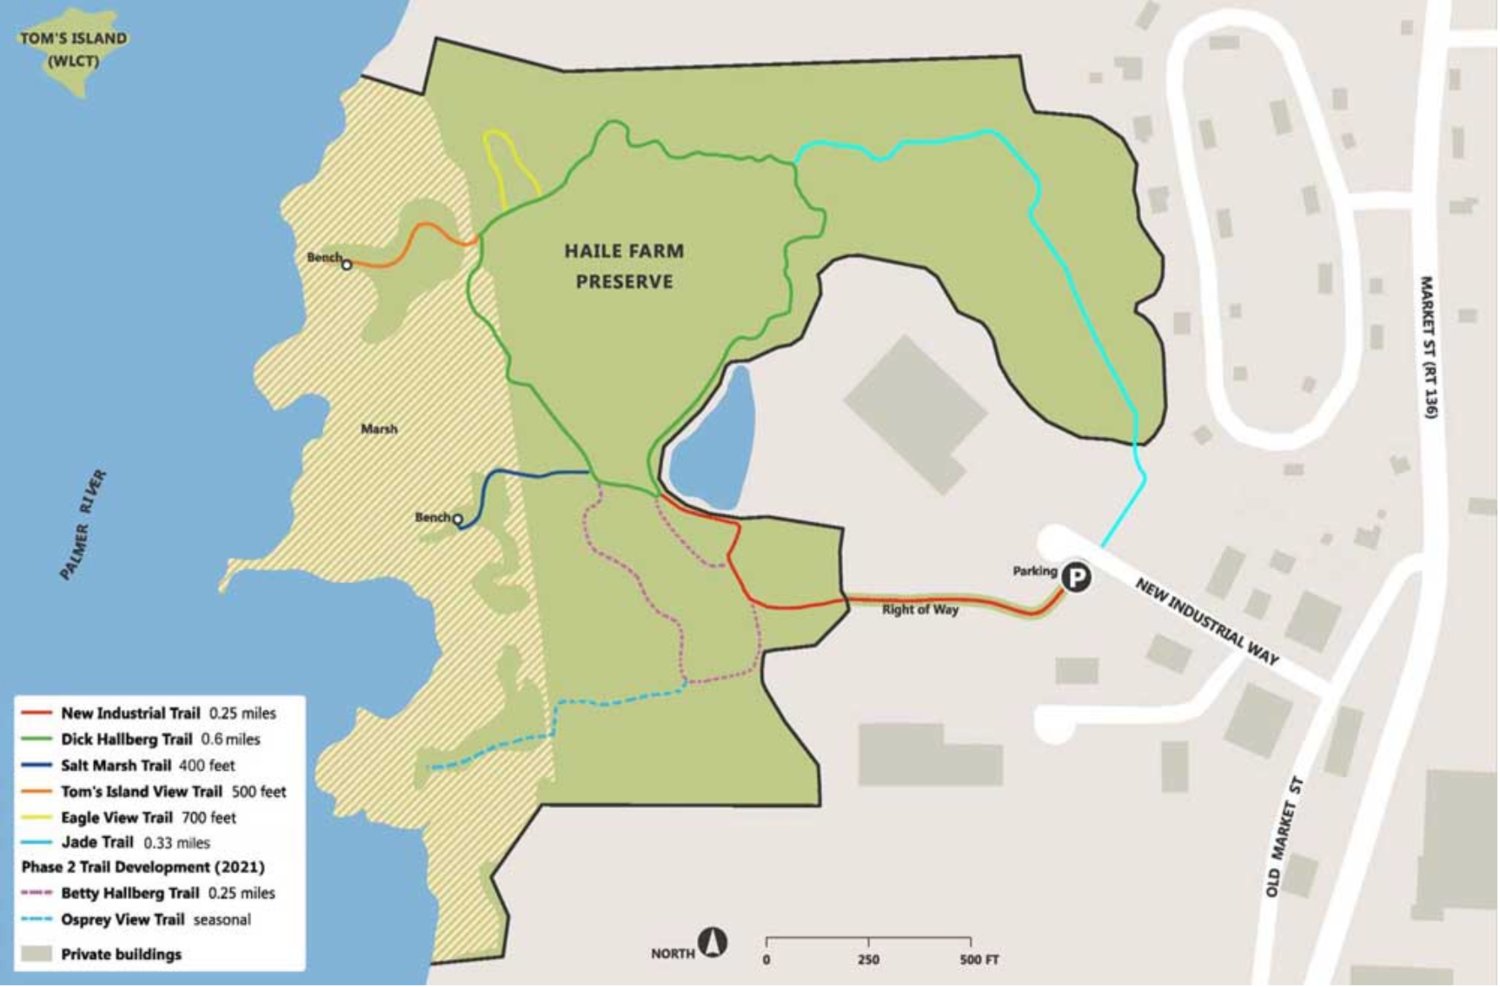 The Haile Farm Preserve consists of a large area of walking trails along the Palmer River, providing great opportunities for hiking and bird watching. It will be the location of the Warren land Conservation Trust’s first day walk of 2022.